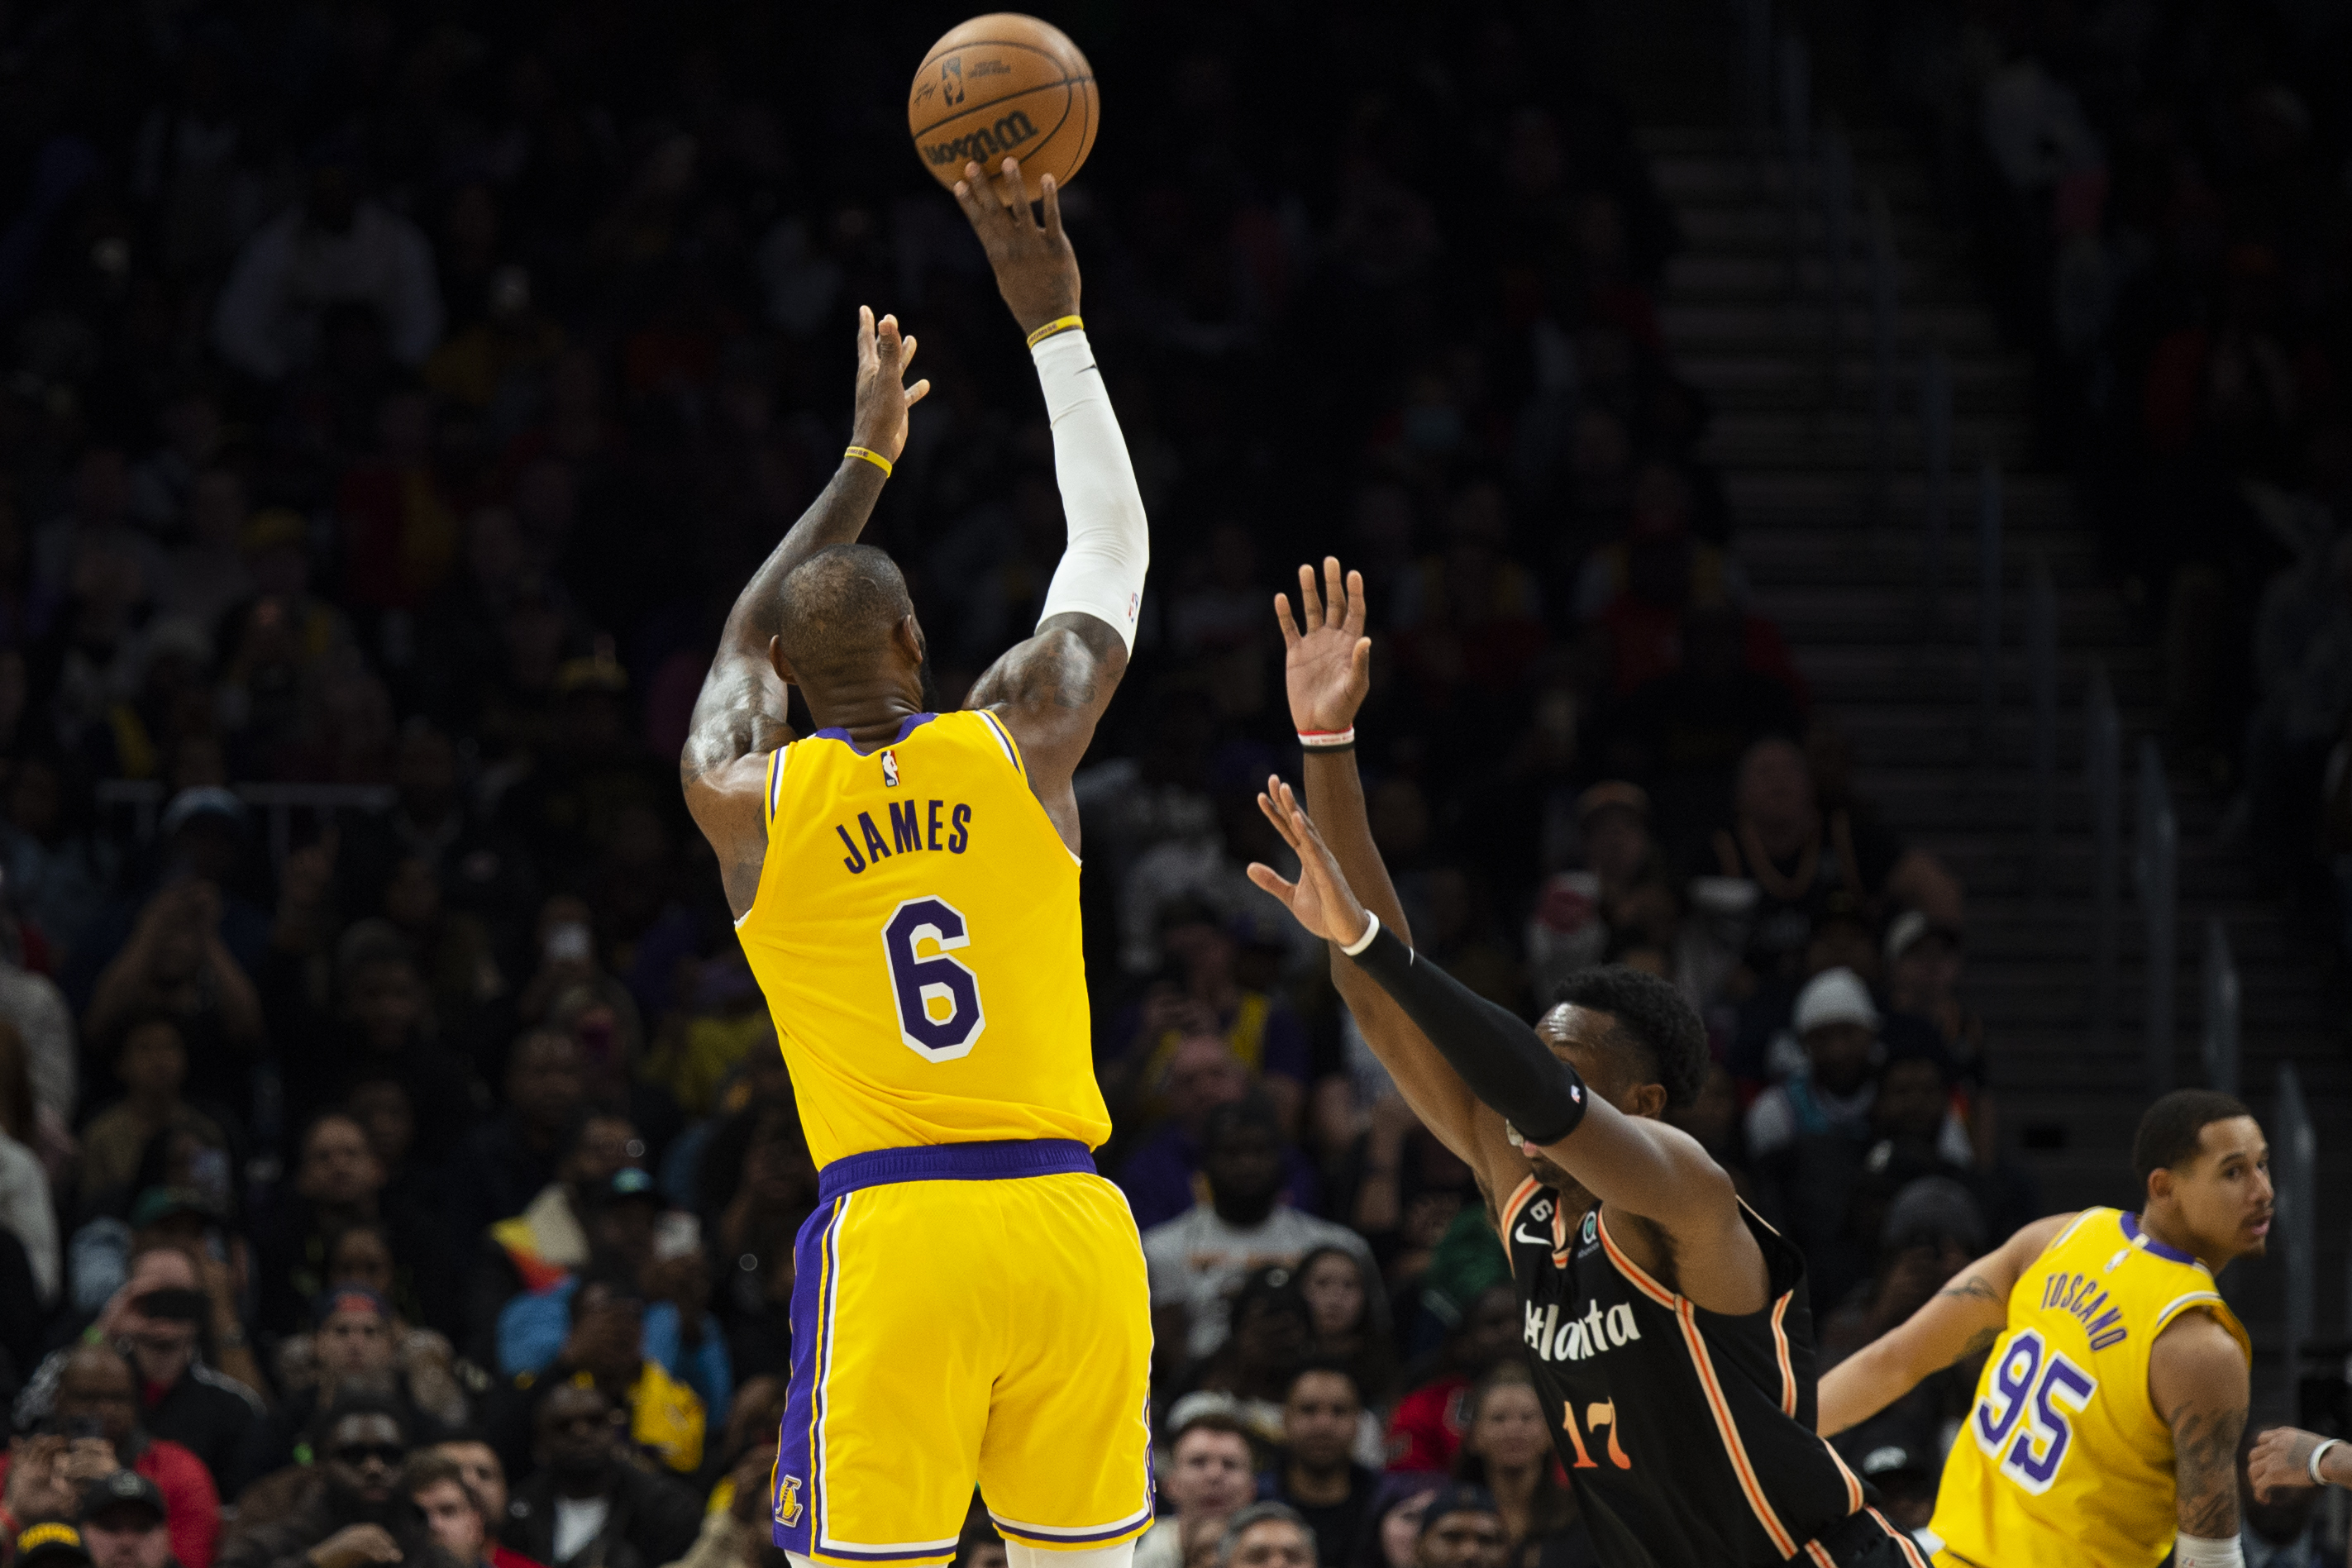 LeBron James scores 47 points on 38th birthday in Lakers' win